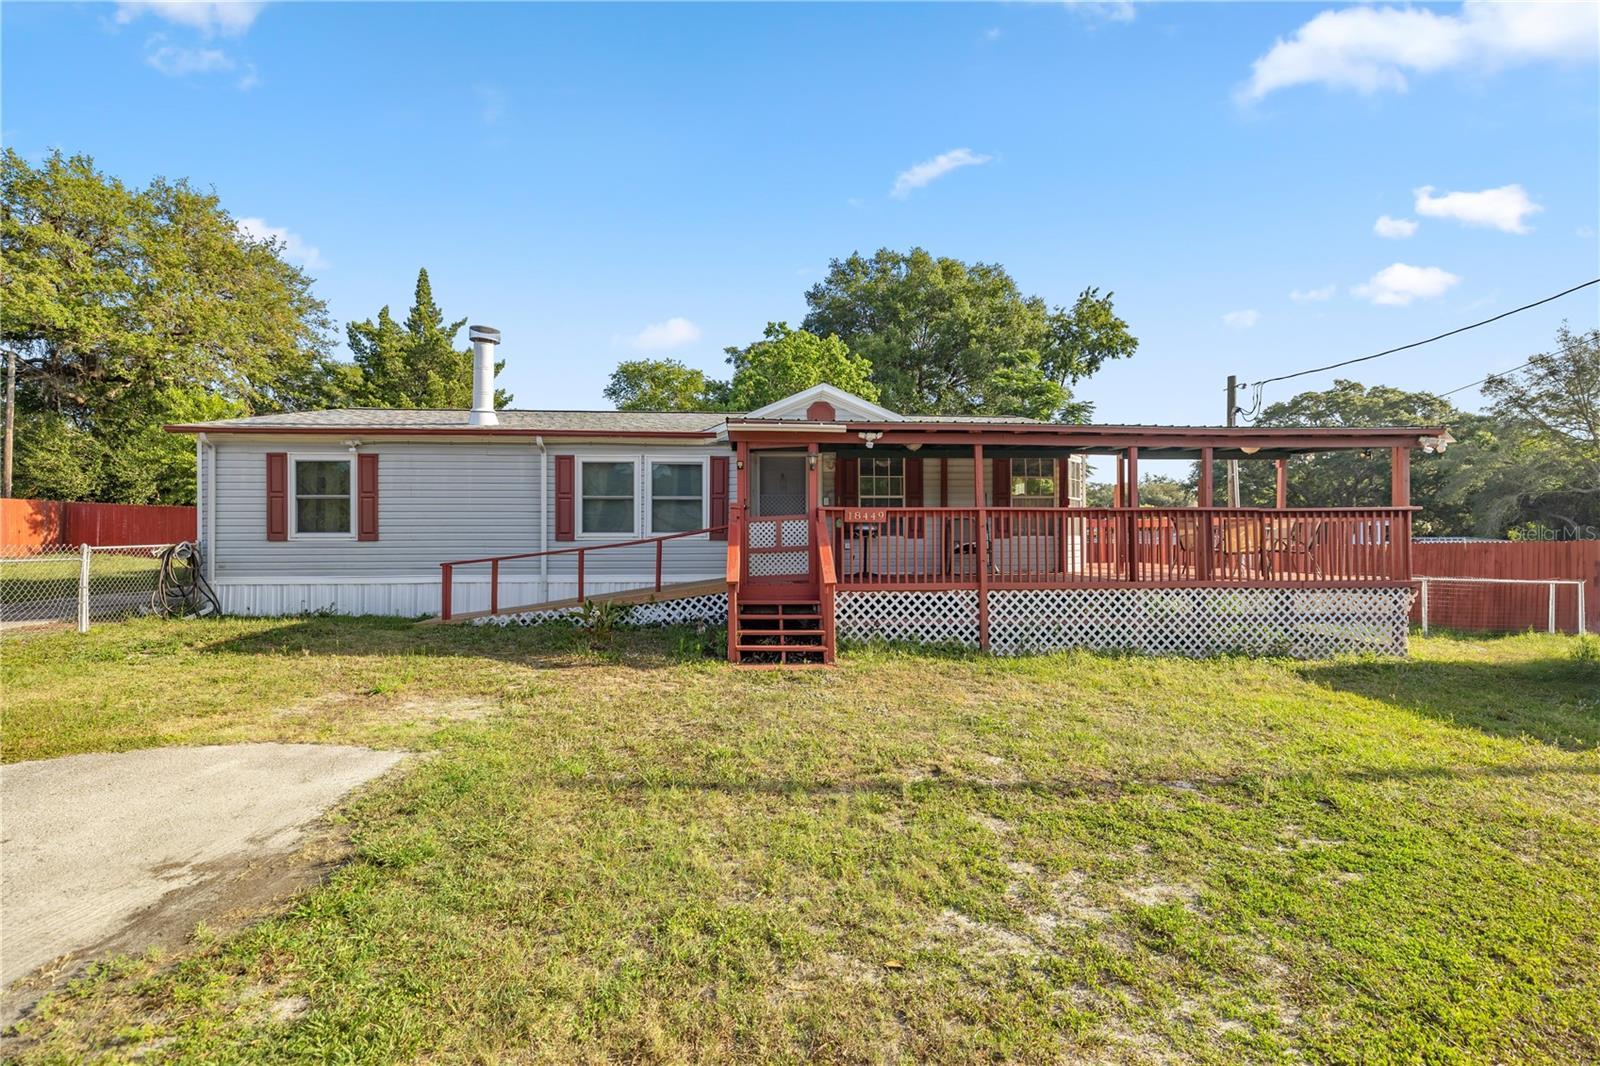 18449 22ND, SILVER SPRINGS, Manufactured Home - Post 1977,  for sale, The Mount Dora Group 